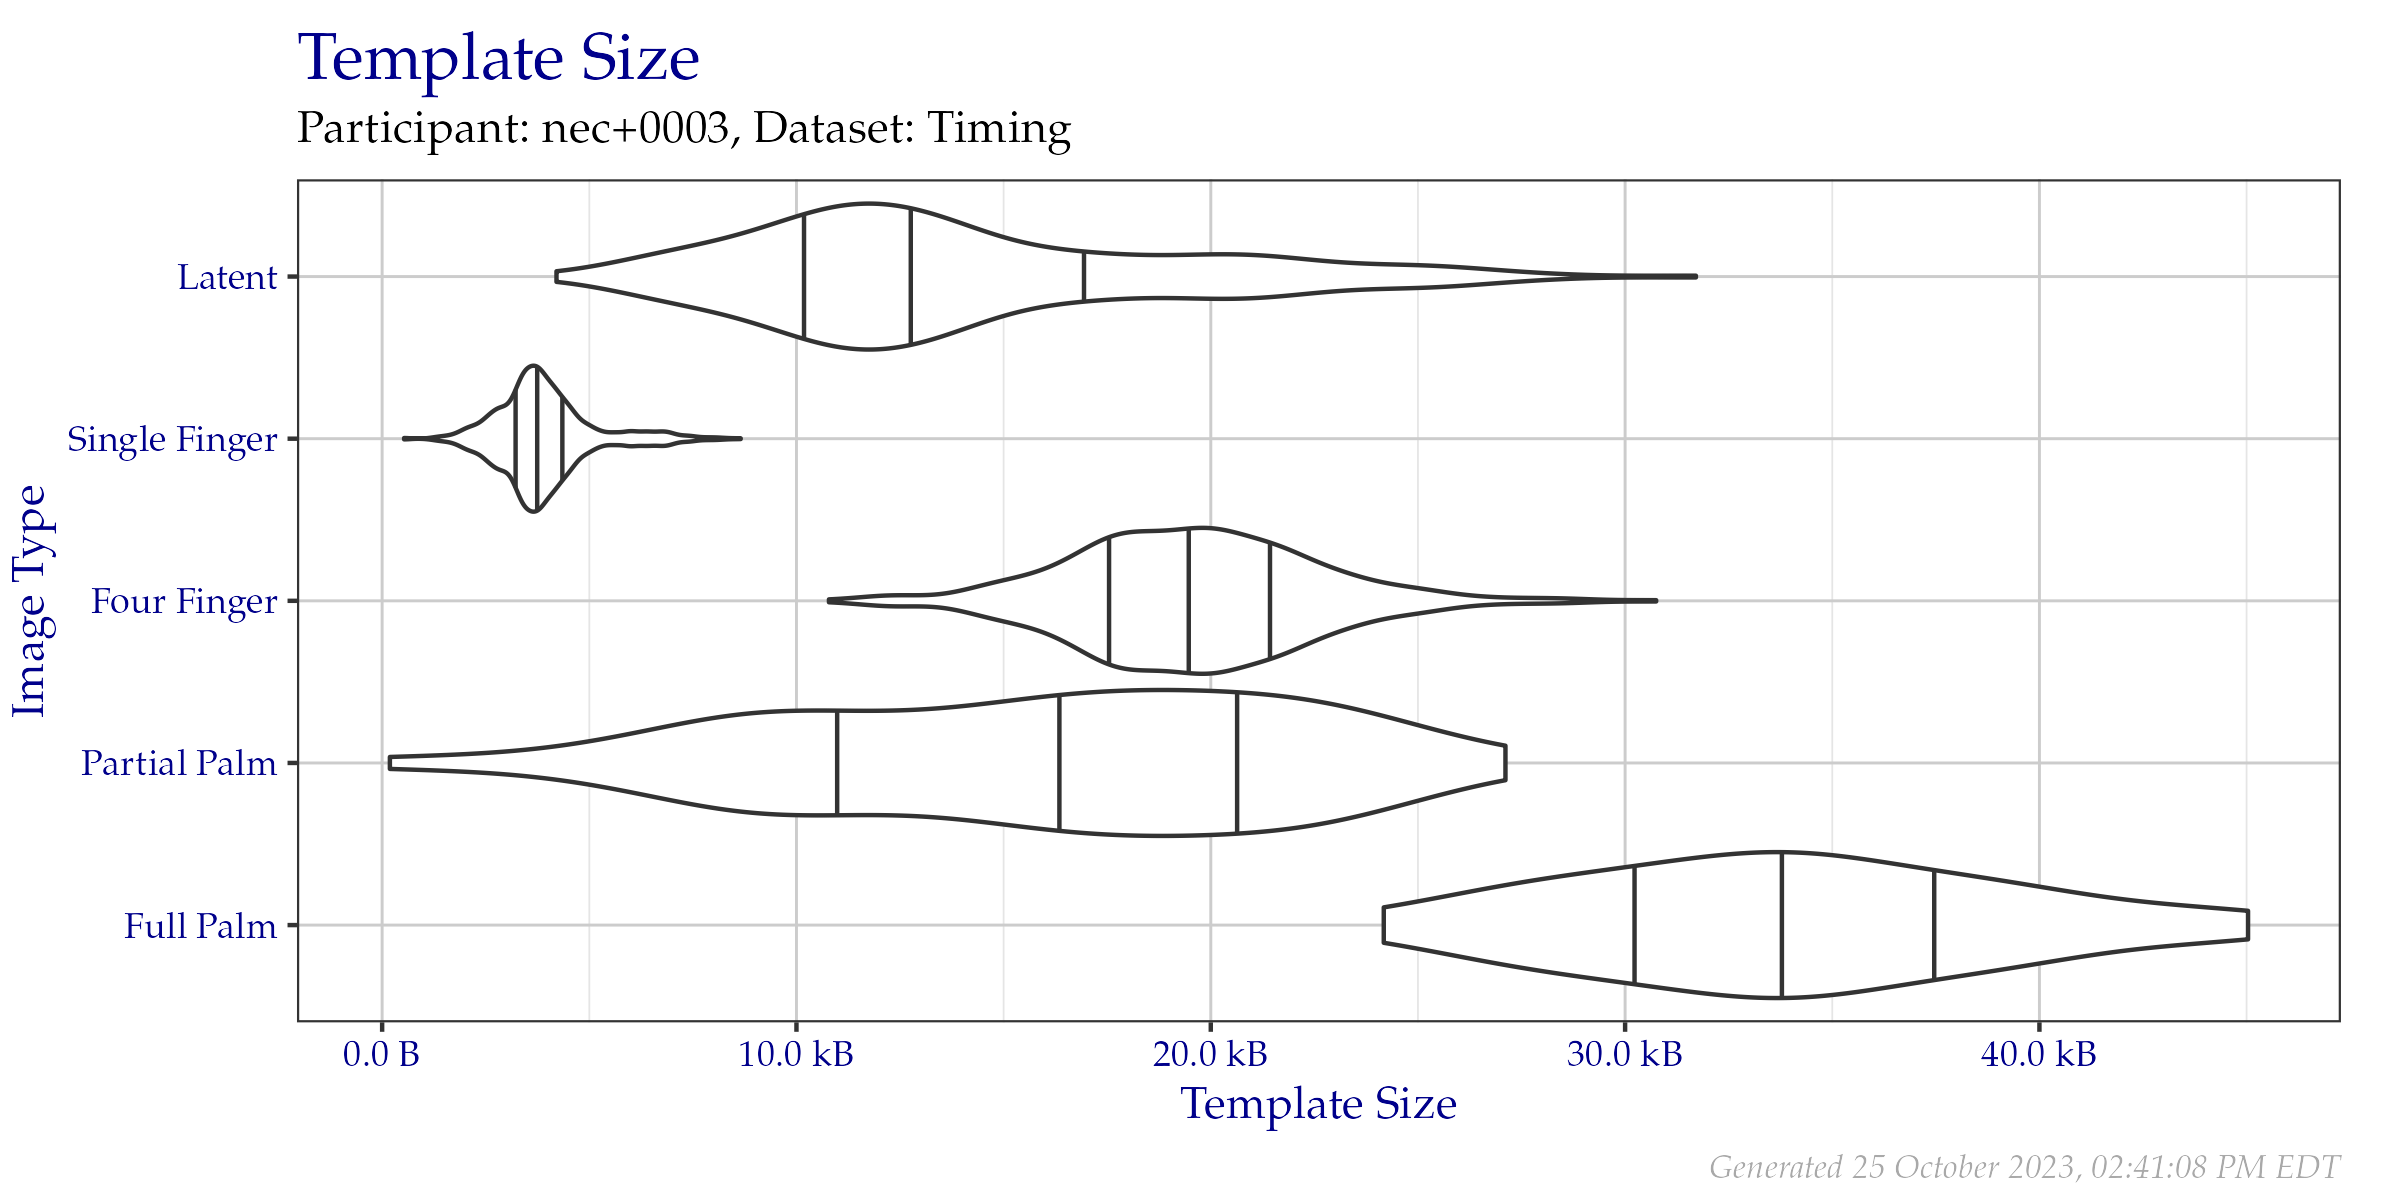 Violin plot of template file sizes as seen on the  Timing Sample dataset. Vertical lines from left to right indicate the 25\%, 50\%, and 75\% quantiles respectively.